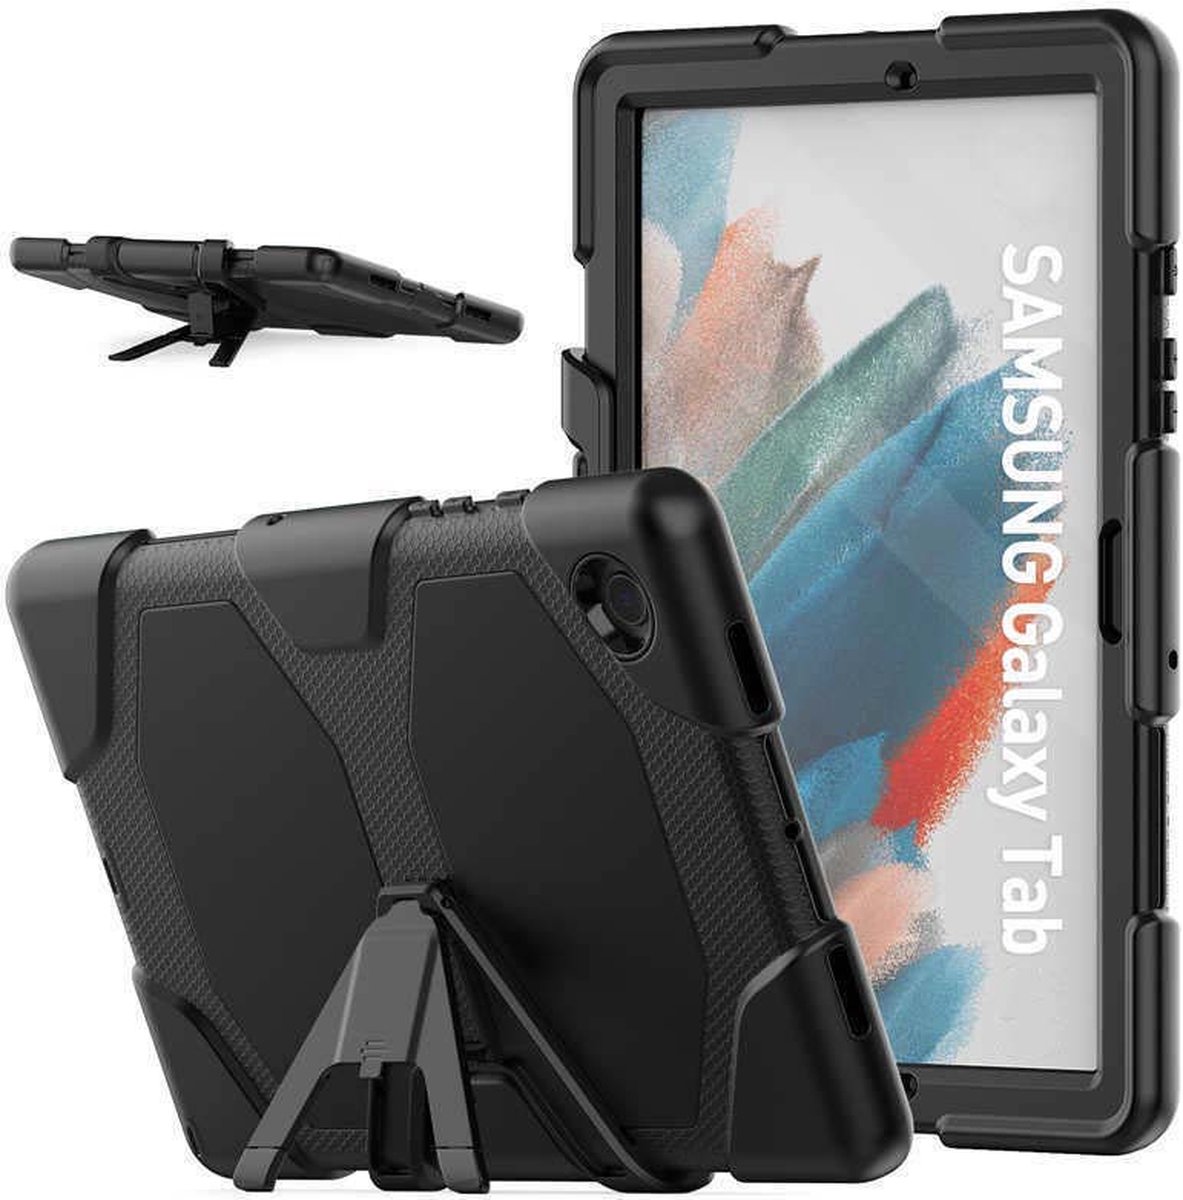 Arara Hoes Geschikt voor Samsung Tab A7 Hoes Extreme Robuuste Armor Case Hoesje Tablethoes – creenprotector Ingebouwde Extreme protectie Army Backcover hoes